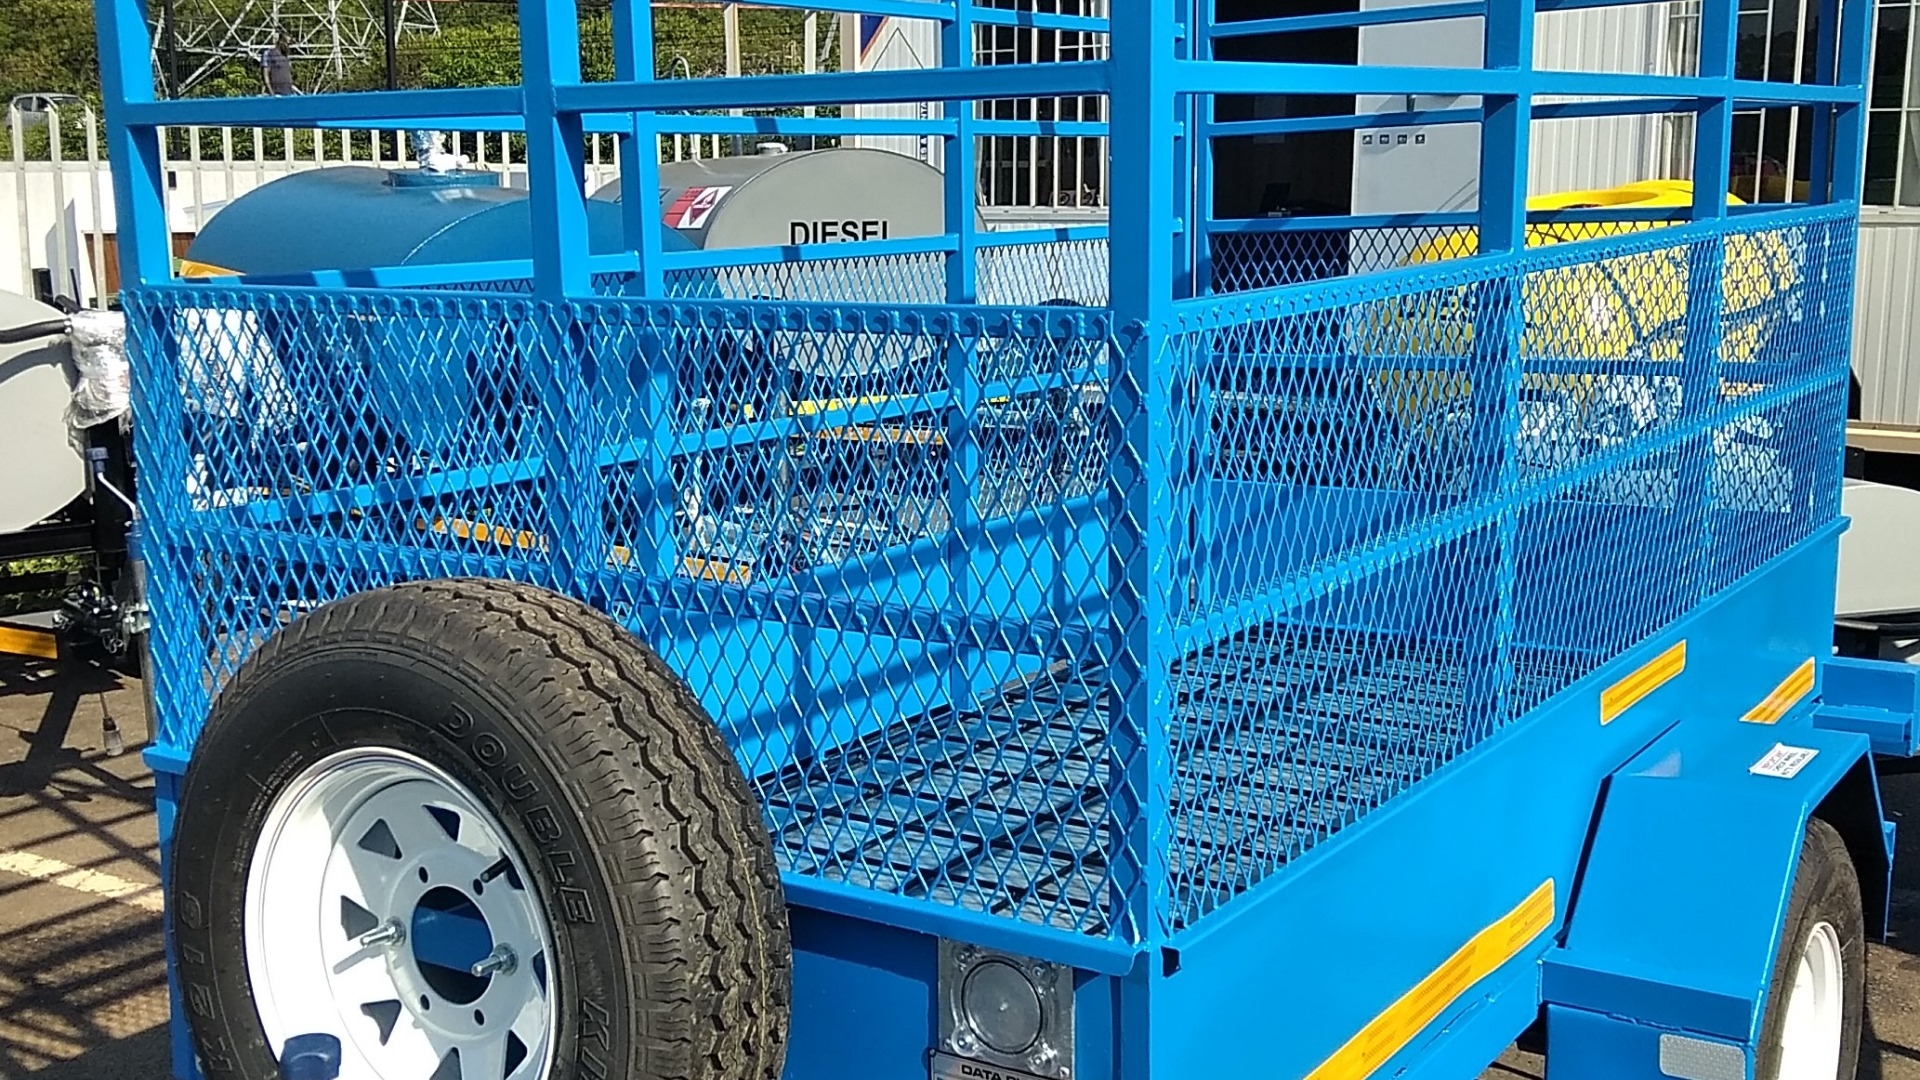 Custom Trailers Cattle Trailers Available In Various Sizes!!! 2021 for sale by Jikelele Tankers and Trailers   | Truck & Trailer Marketplaces